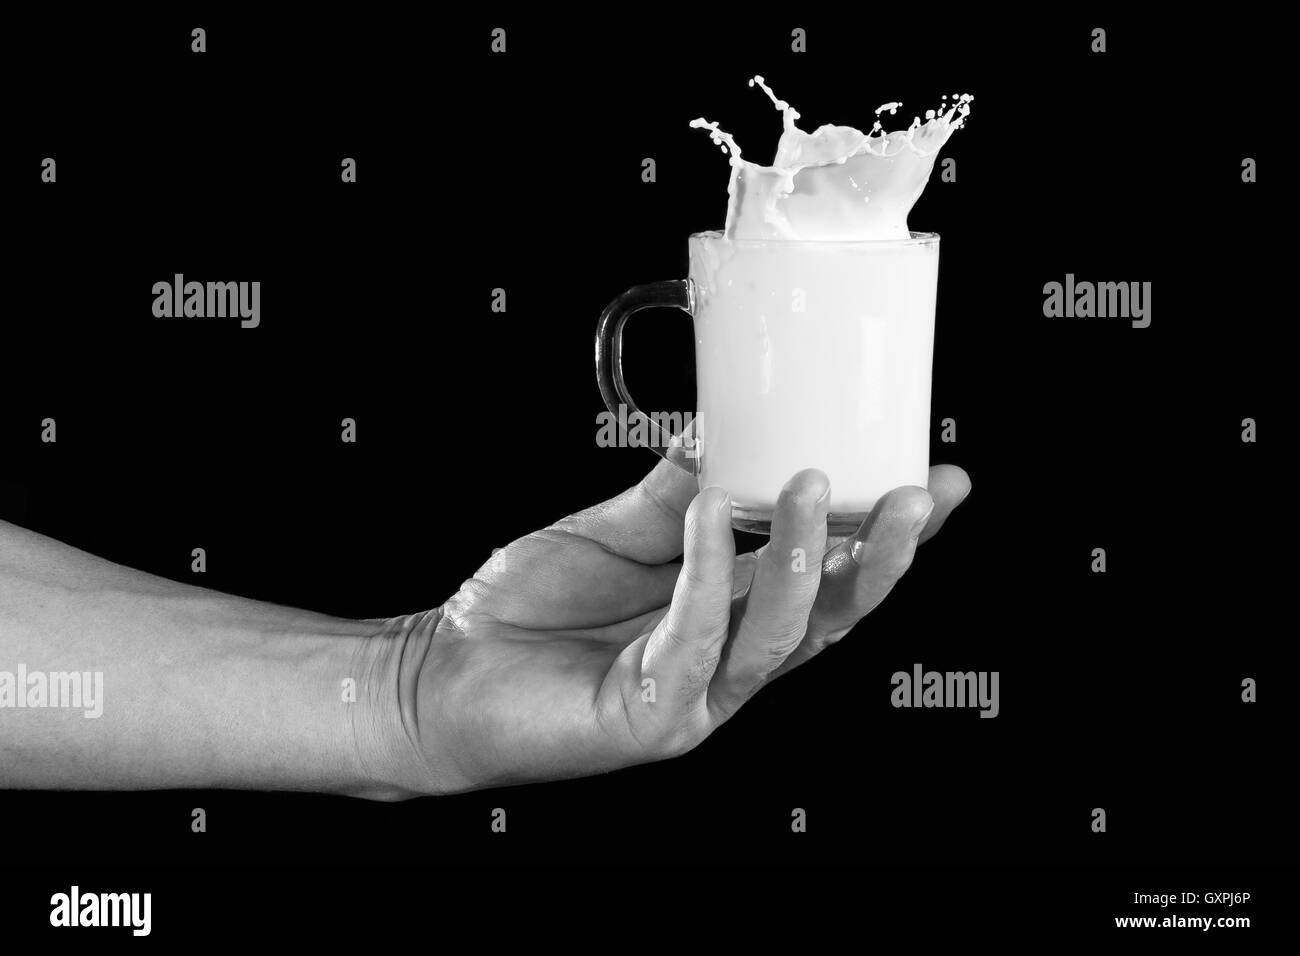 man's hand holding a cup of milk with a splash on a dark background Stock Photo